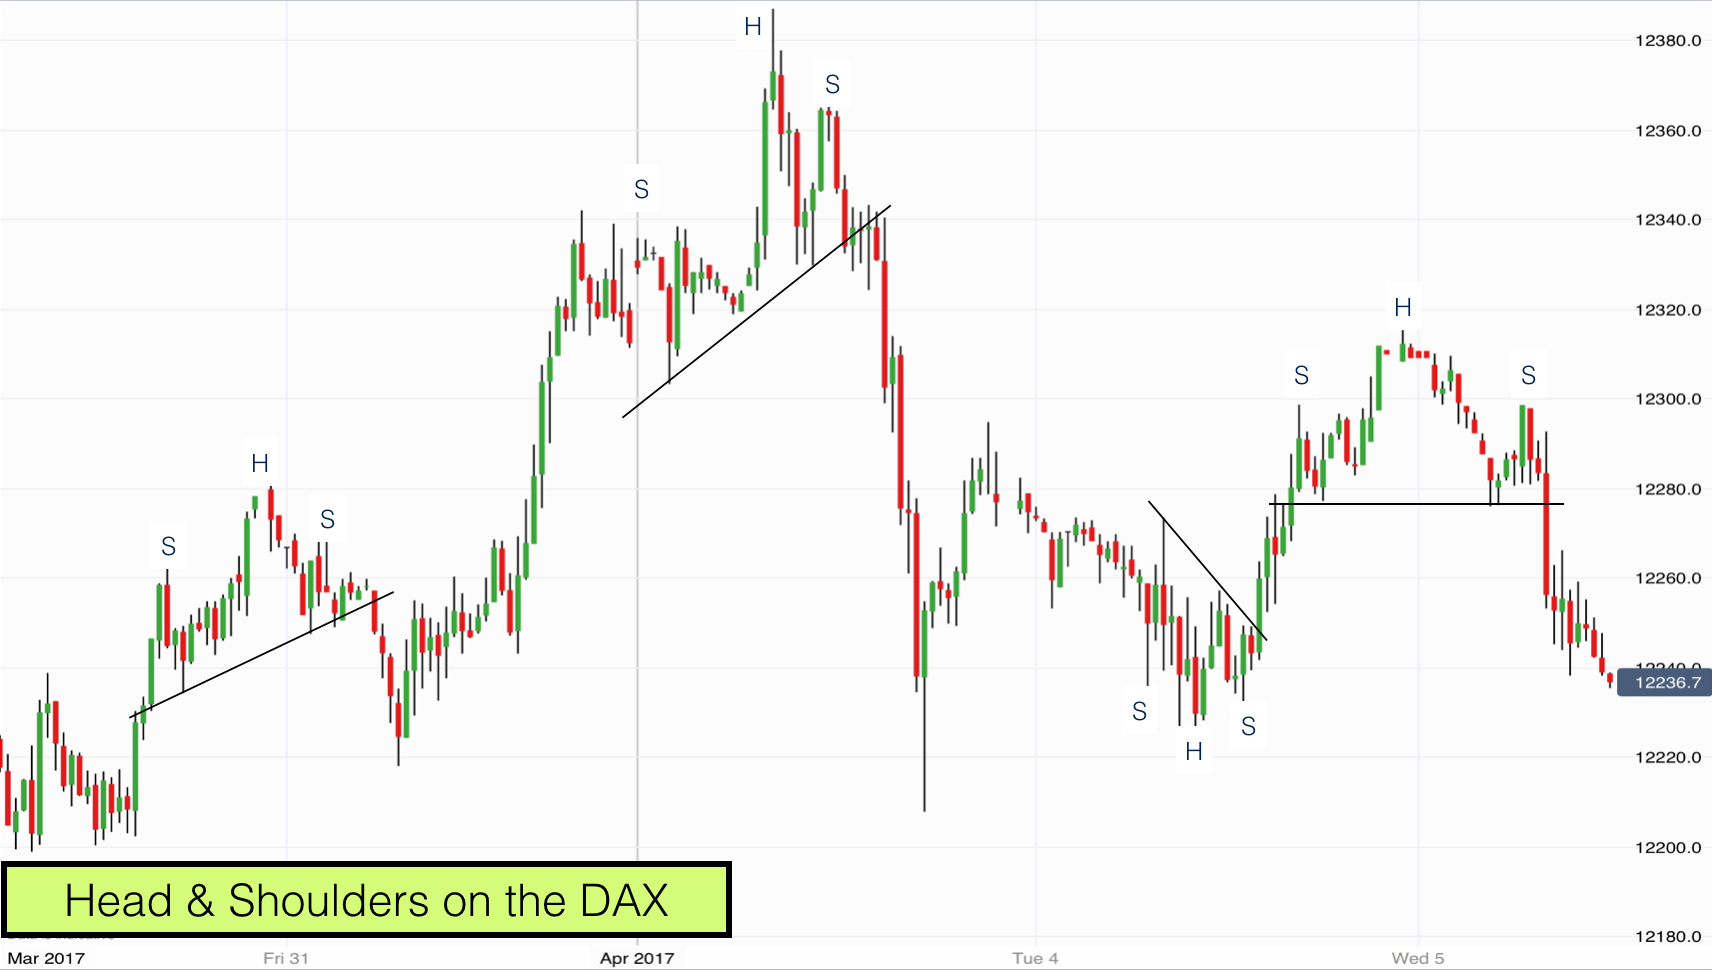 Head & Shoulders Chart Patterns on the DAX April 2017